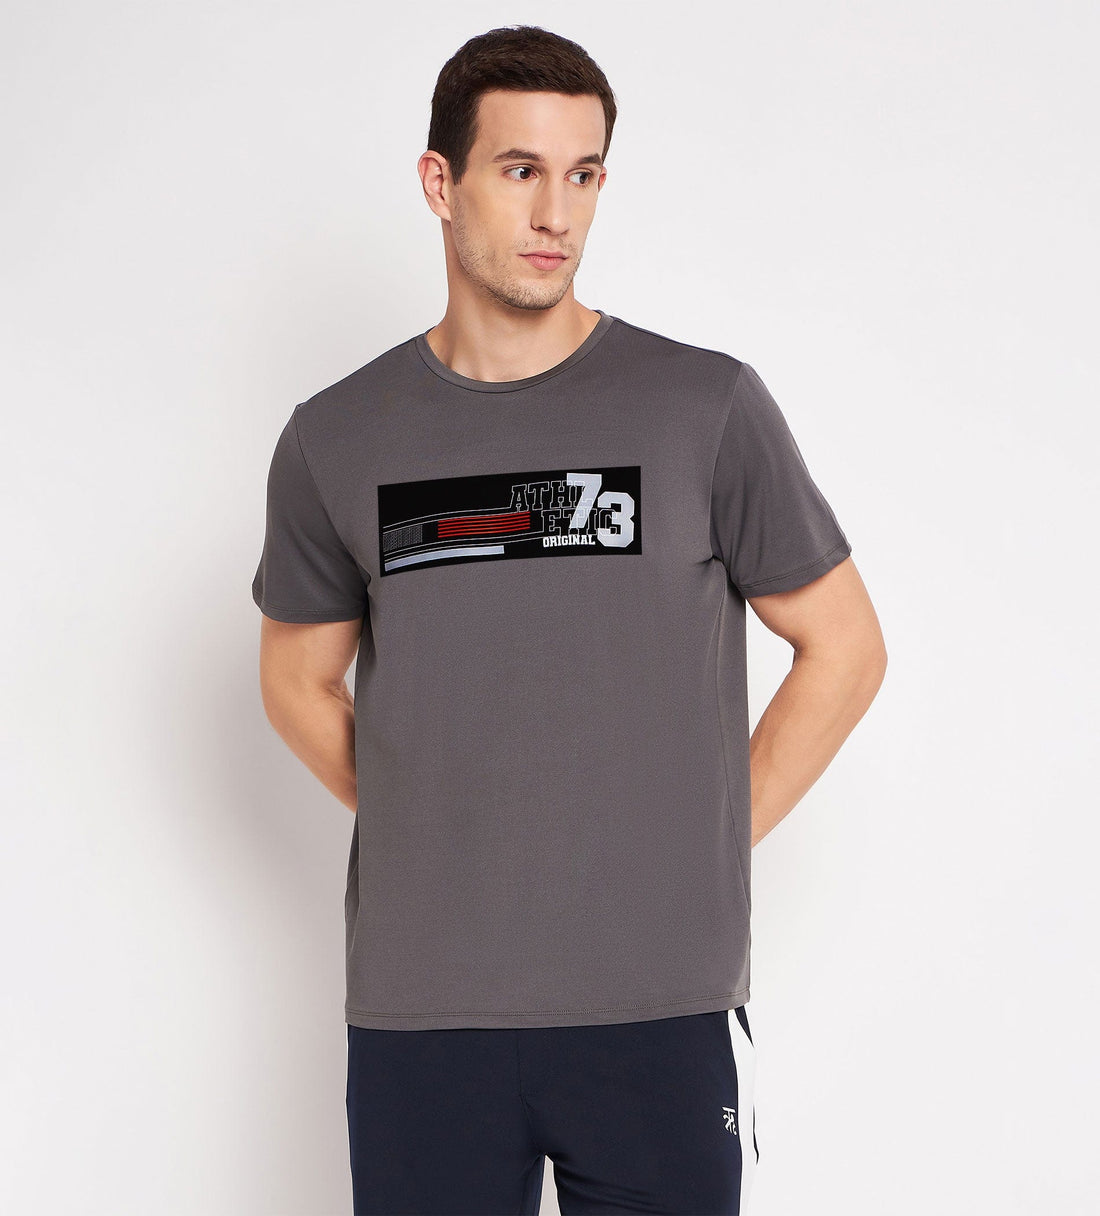 T-shirts T-Shirt Grey Crew Neck T-Shirt with Chest Print for Men